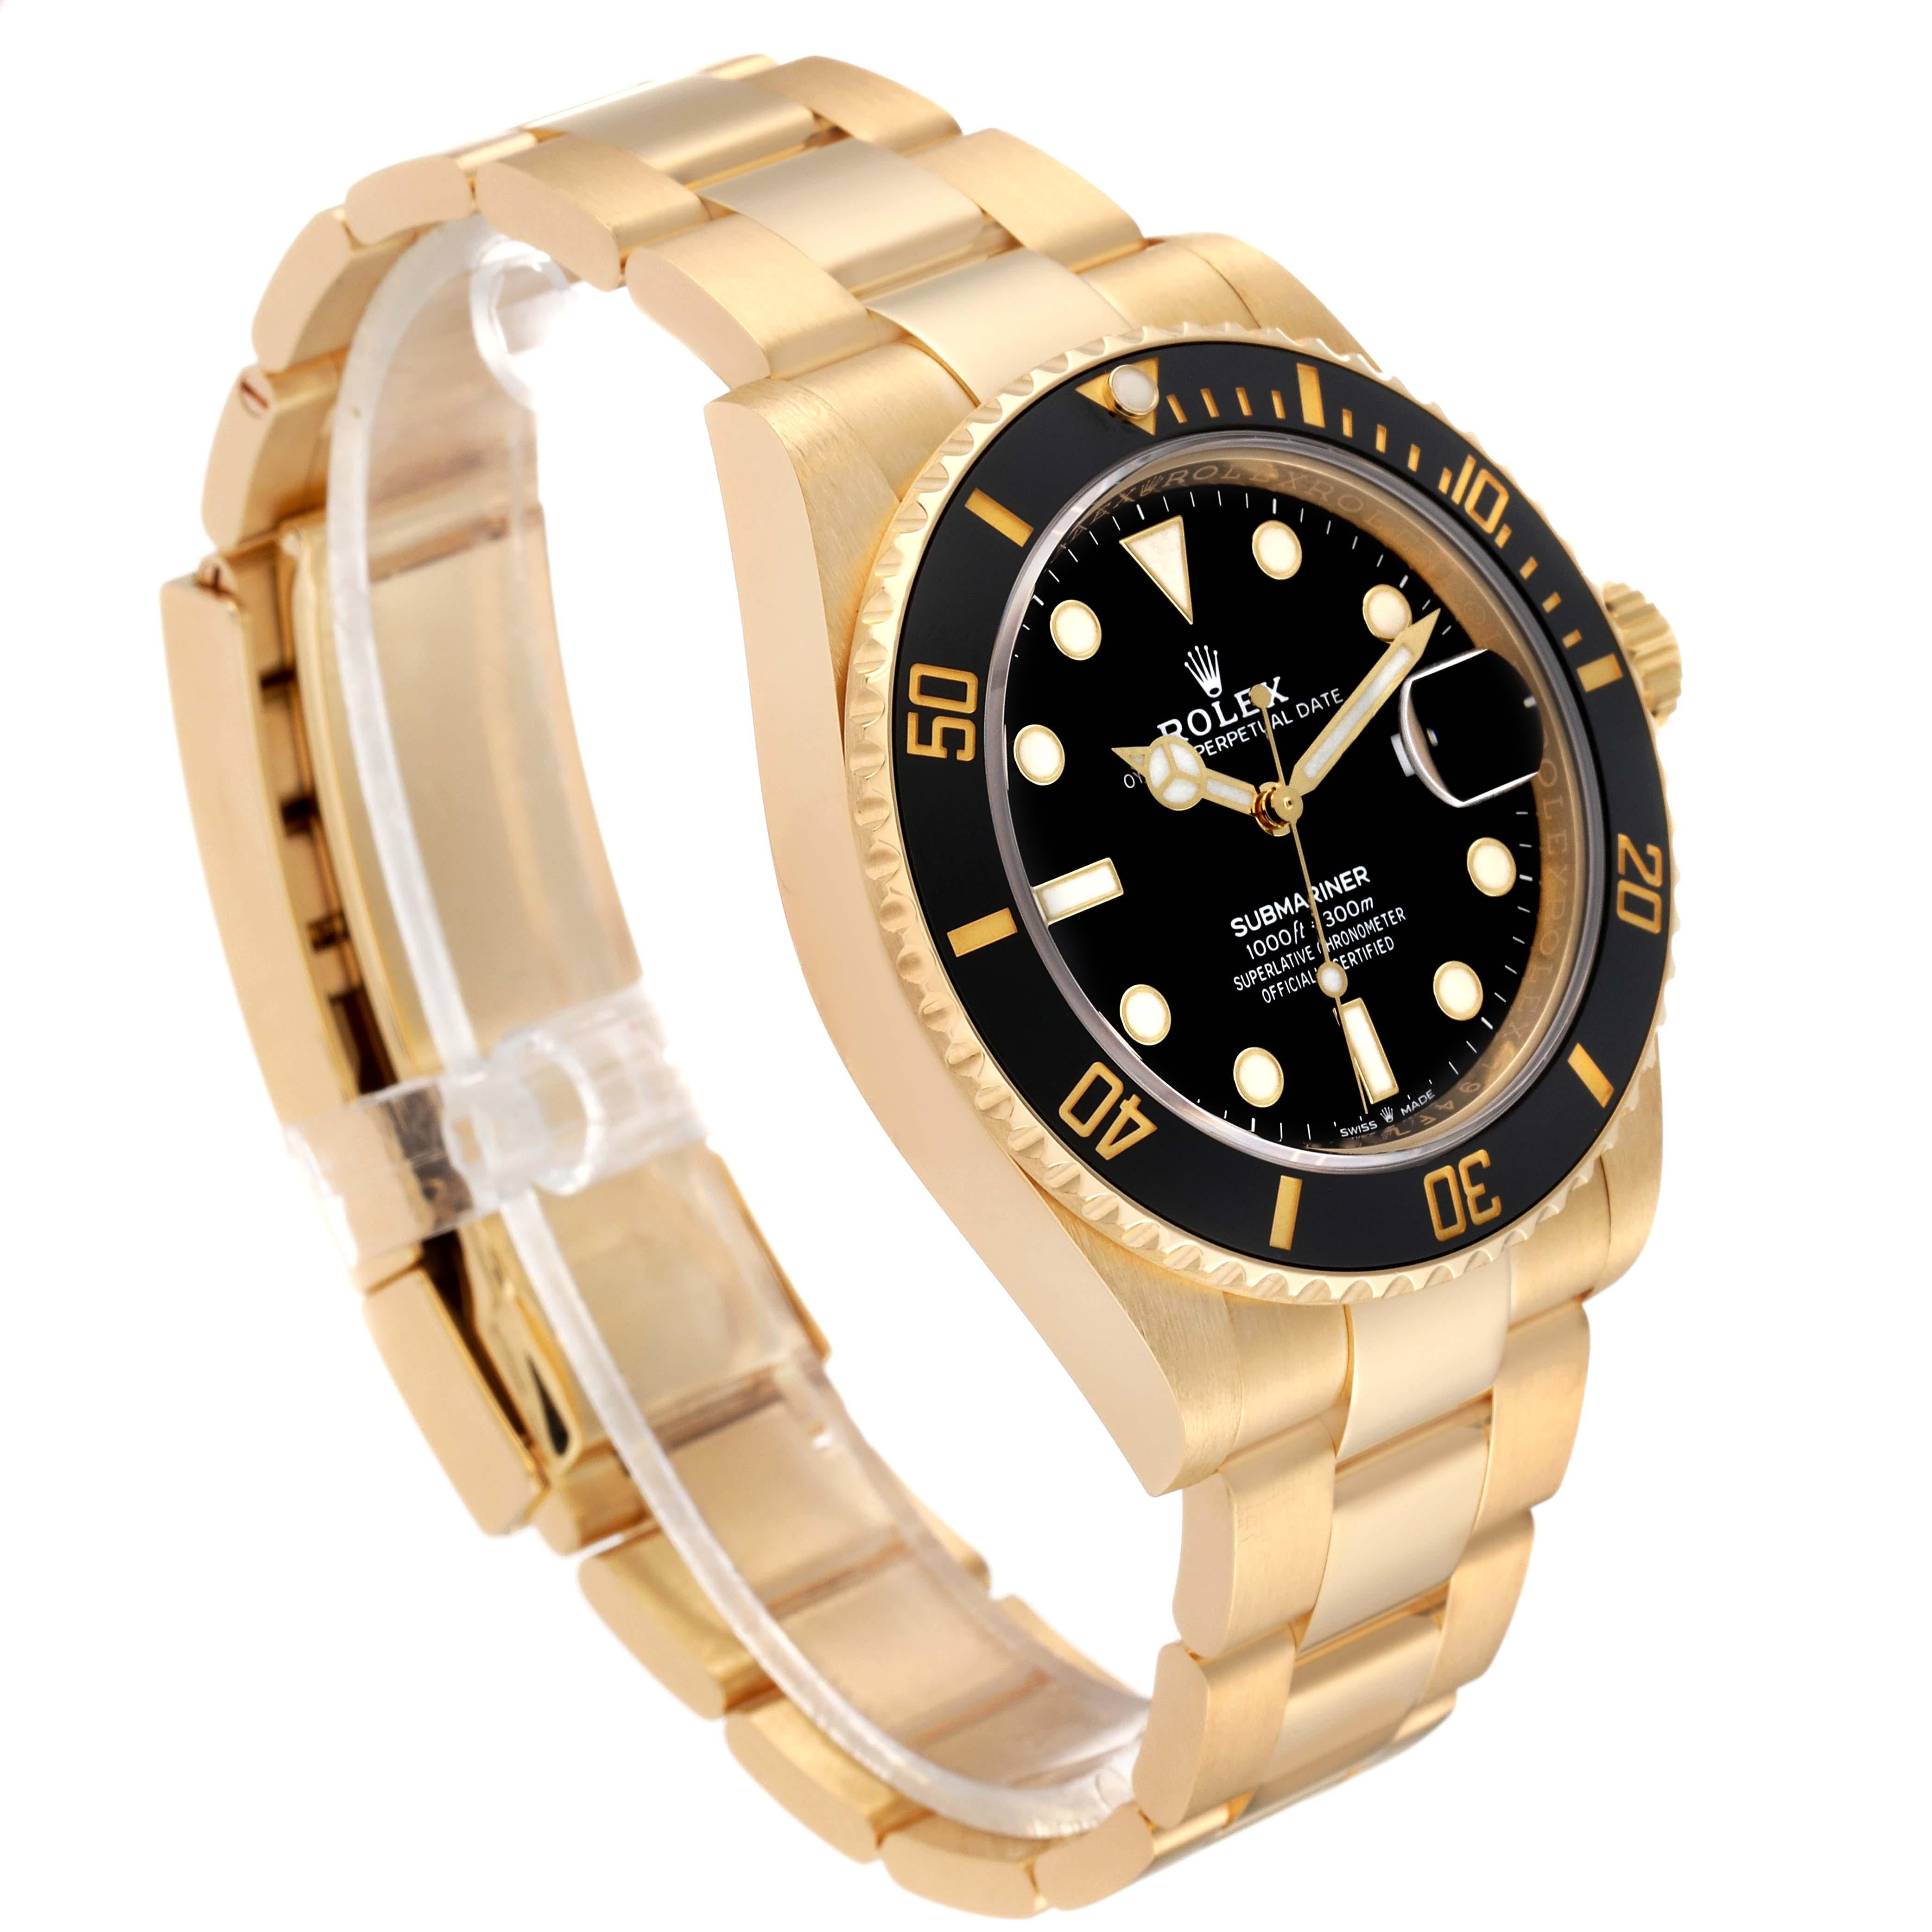 Rolex Submariner Yellow Gold Black Dial Bezel Mens Watch 126618 Box Card For Sale 2